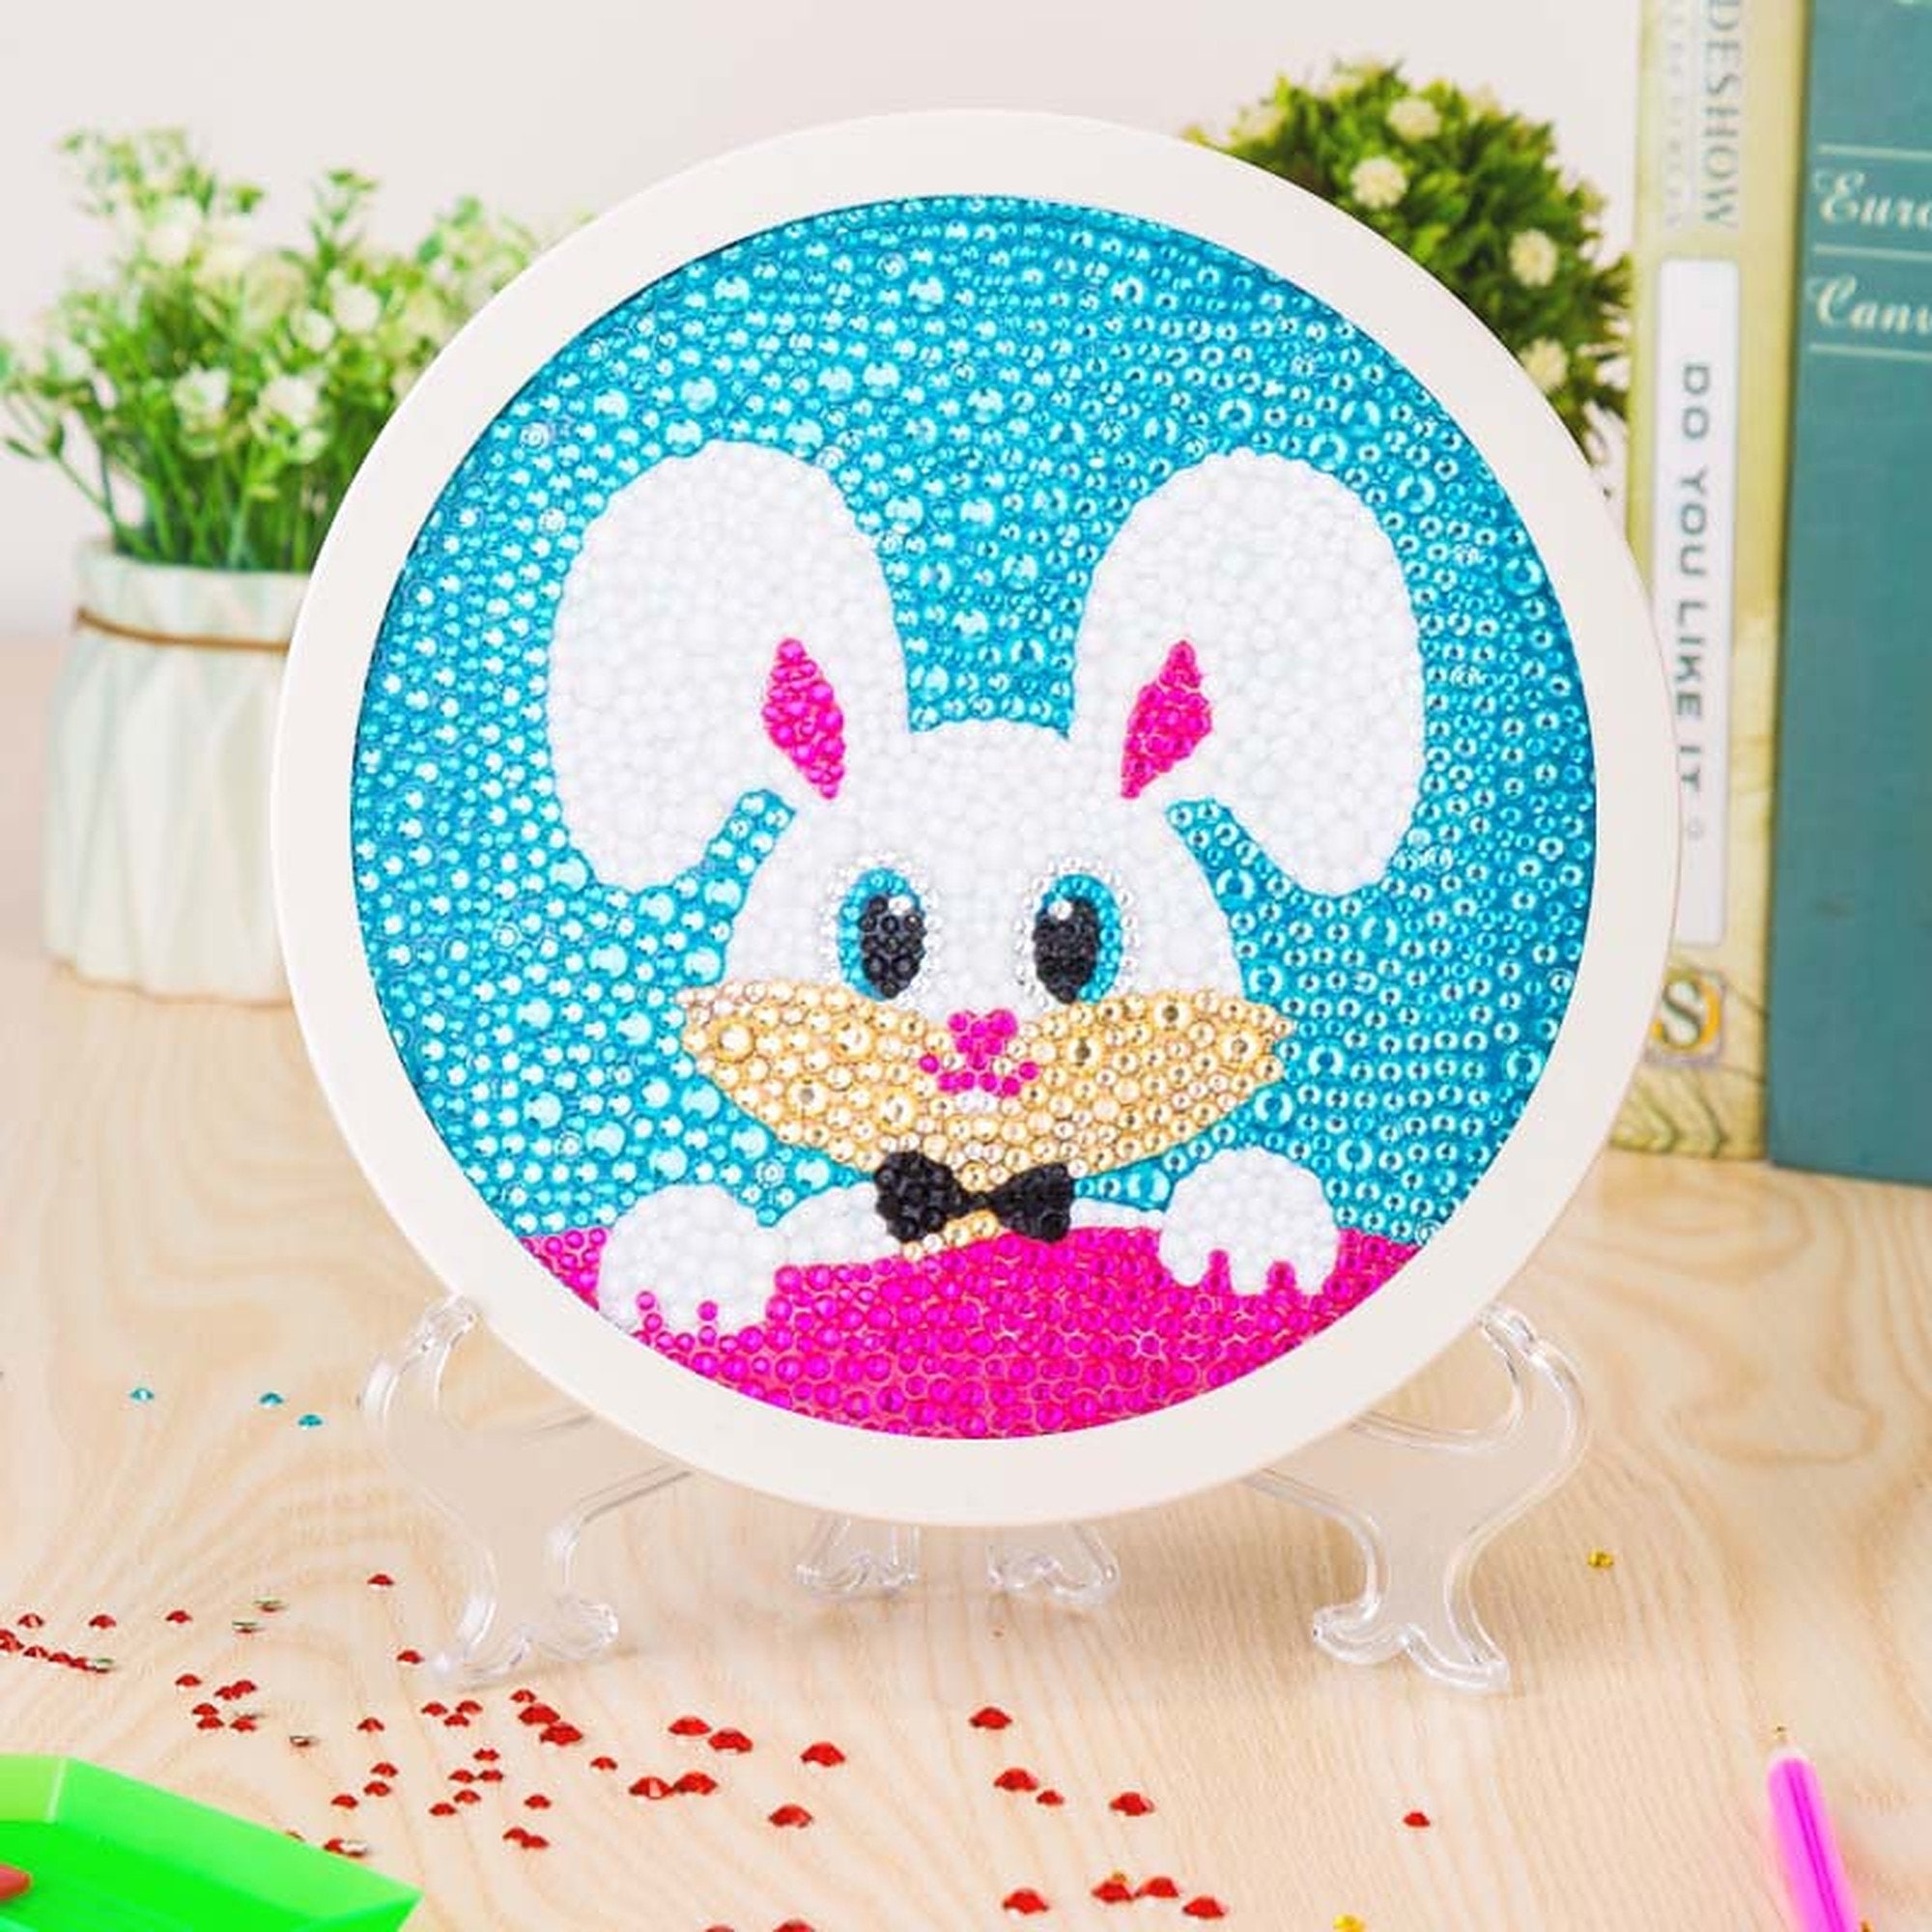 Finelylove Easter DIY 5D Diamond Art Painting Kits, Easter Rabbit Eggs Tabletop Decoration with LED String Light, Cute Diamond Paintings Ornament for